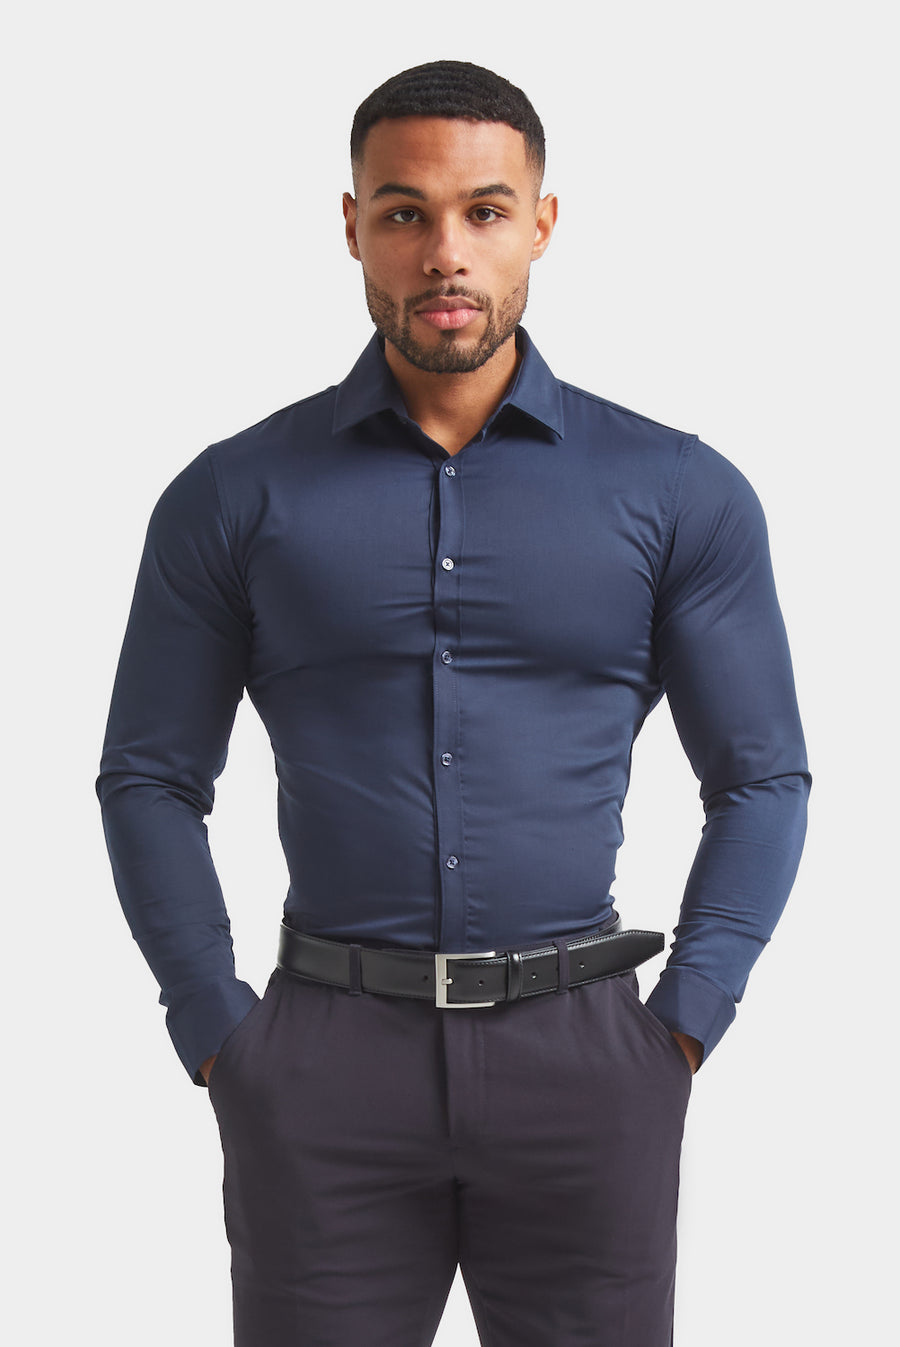 TAILORED Shirt USA Fit - Burgundy - Signature Muscle in ATHLETE 2.0